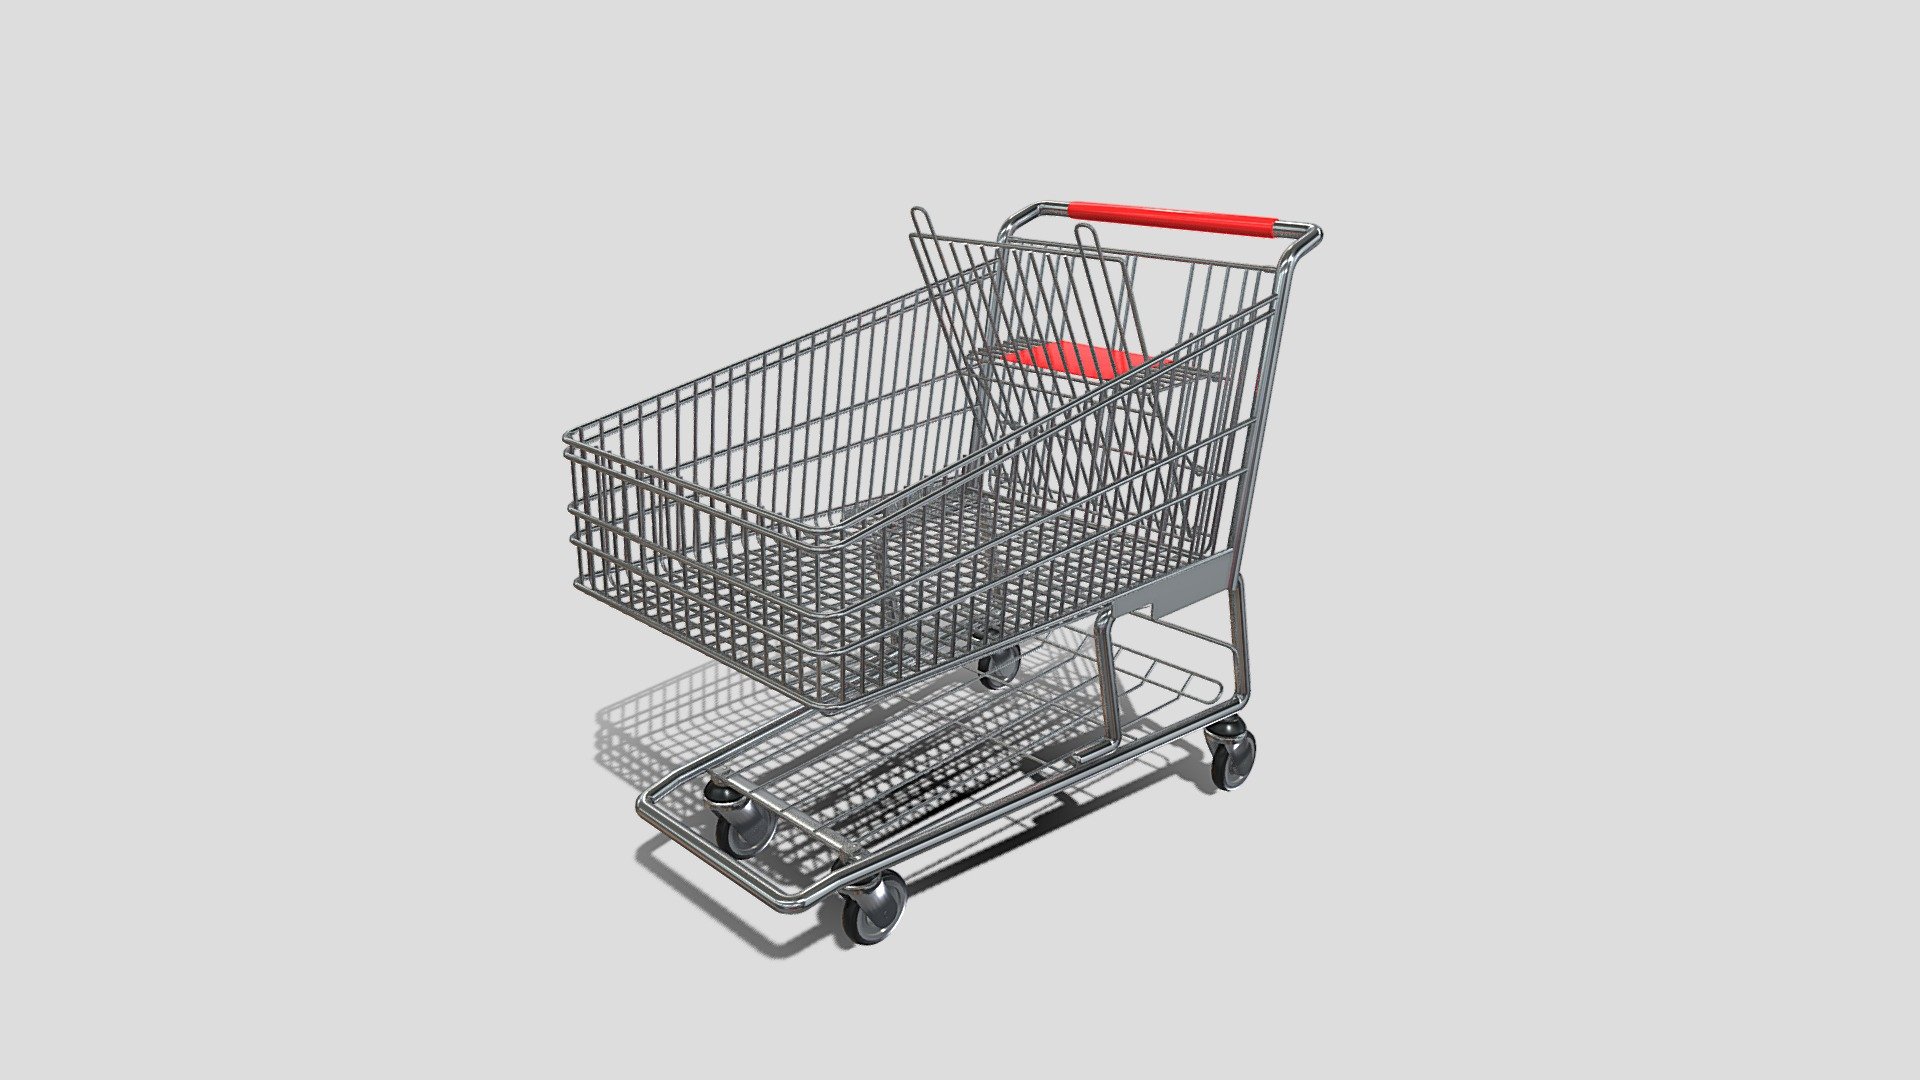 Shopping cart 3d model rendered with Cycles in Blender, as per seen on attached images. 
The model is scaled to real-life scale.

File formats:
-.blend, rendered with cycles, as seen in the images;
-.obj, with materials applied;
-.dae, with materials applied;
-.fbx, with materials applied;
-.stl;

3D Software:
The 3D model was originally created in Blender 3.1 and rendered with Cycles.

Materials and textures:
The models have materials applied in all formats, and are ready to import and render.
Materials are image based using PBR, the model comes with five 4k png image textures.

Preview scenes:
The preview images are rendered in Blender using its built-in render engine &lsquo;Cycles'.
Note that the blend files come directly with the rendering scene included and the render command will generate the exact result as seen in previews.
Scene elements are on a different layer from the actual model for easier manipulation of objects.

For any problems please feel free to contact me.

Don't forget to rate and enjoy! - Shopping cart v7 - Buy Royalty Free 3D model by dragosburian 3d model